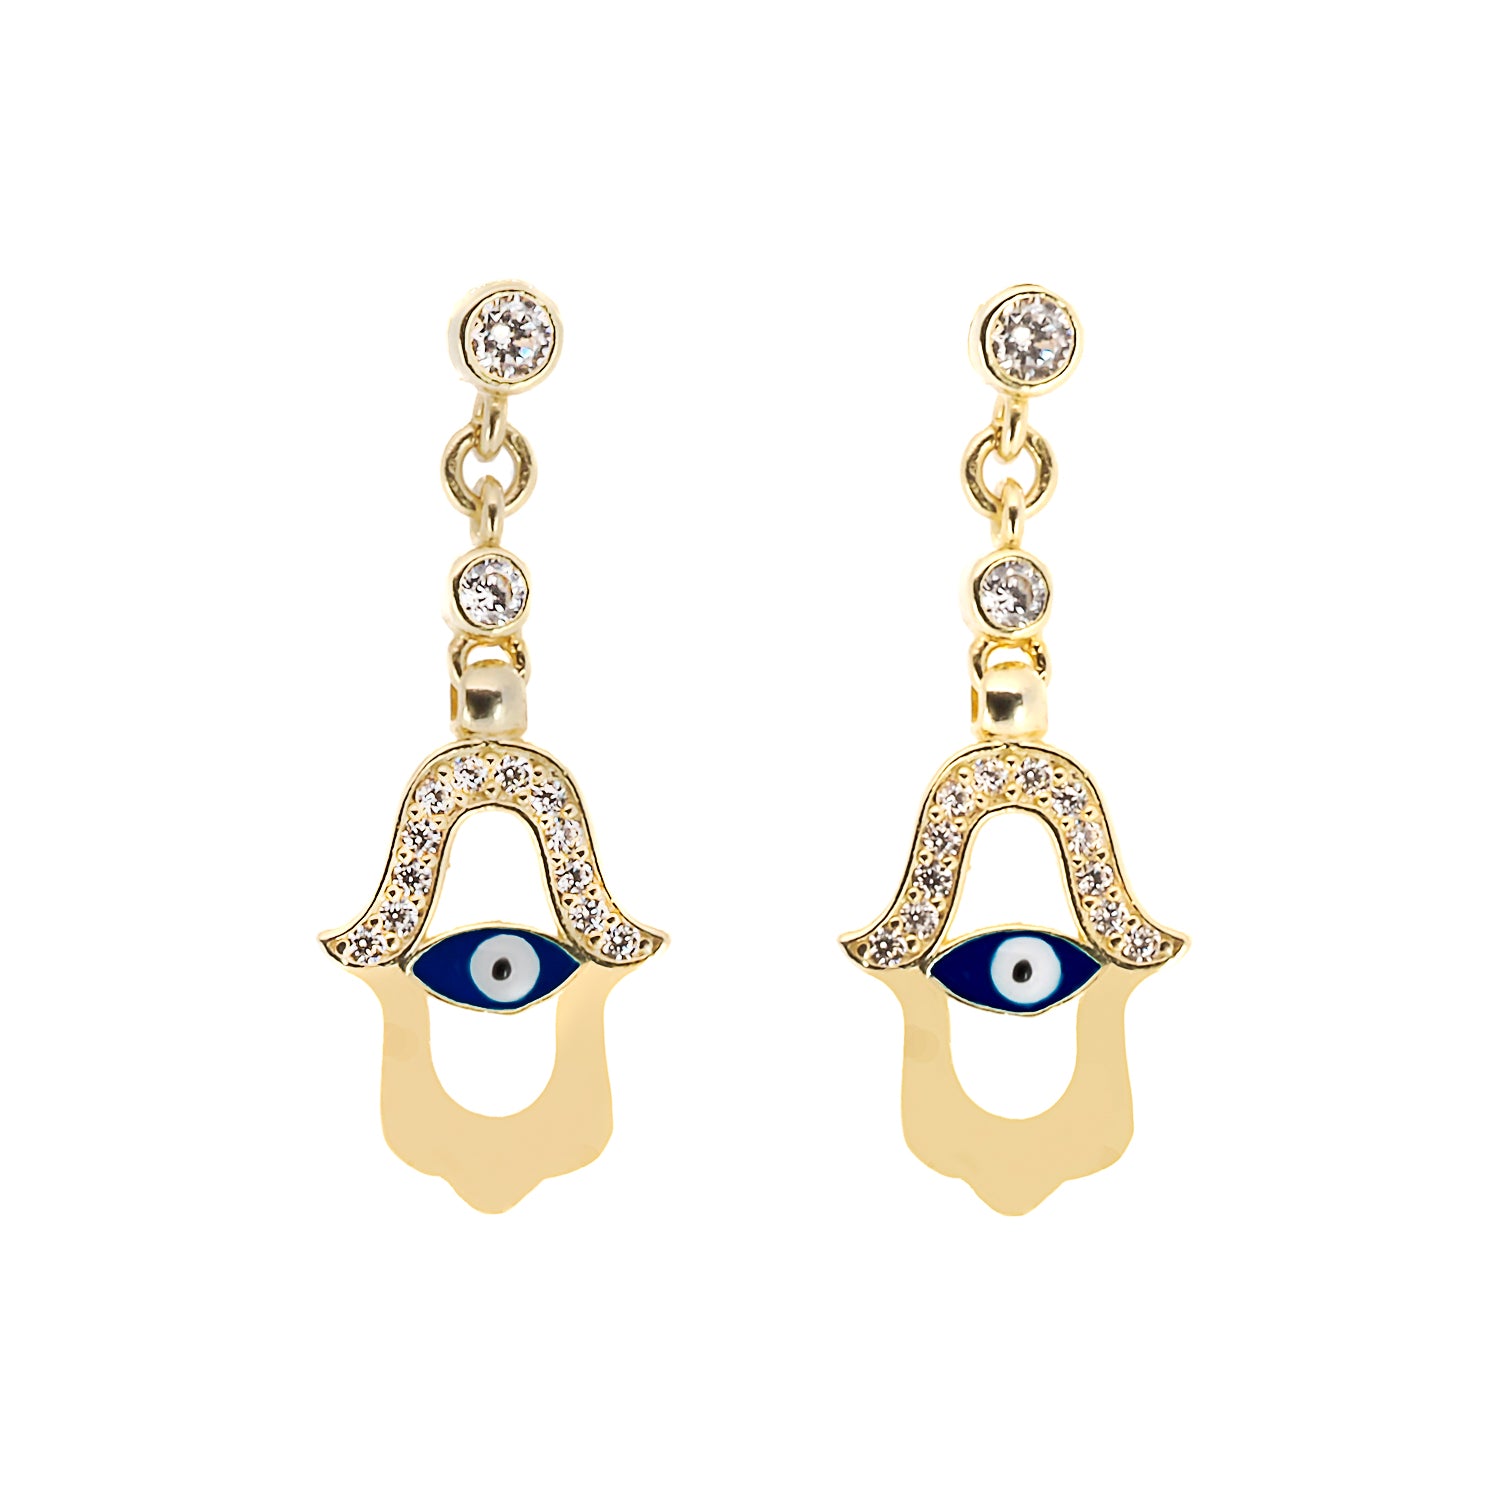 Blue Evil Eye Gold Hamsa Earrings - A stunning blend of protection and beauty